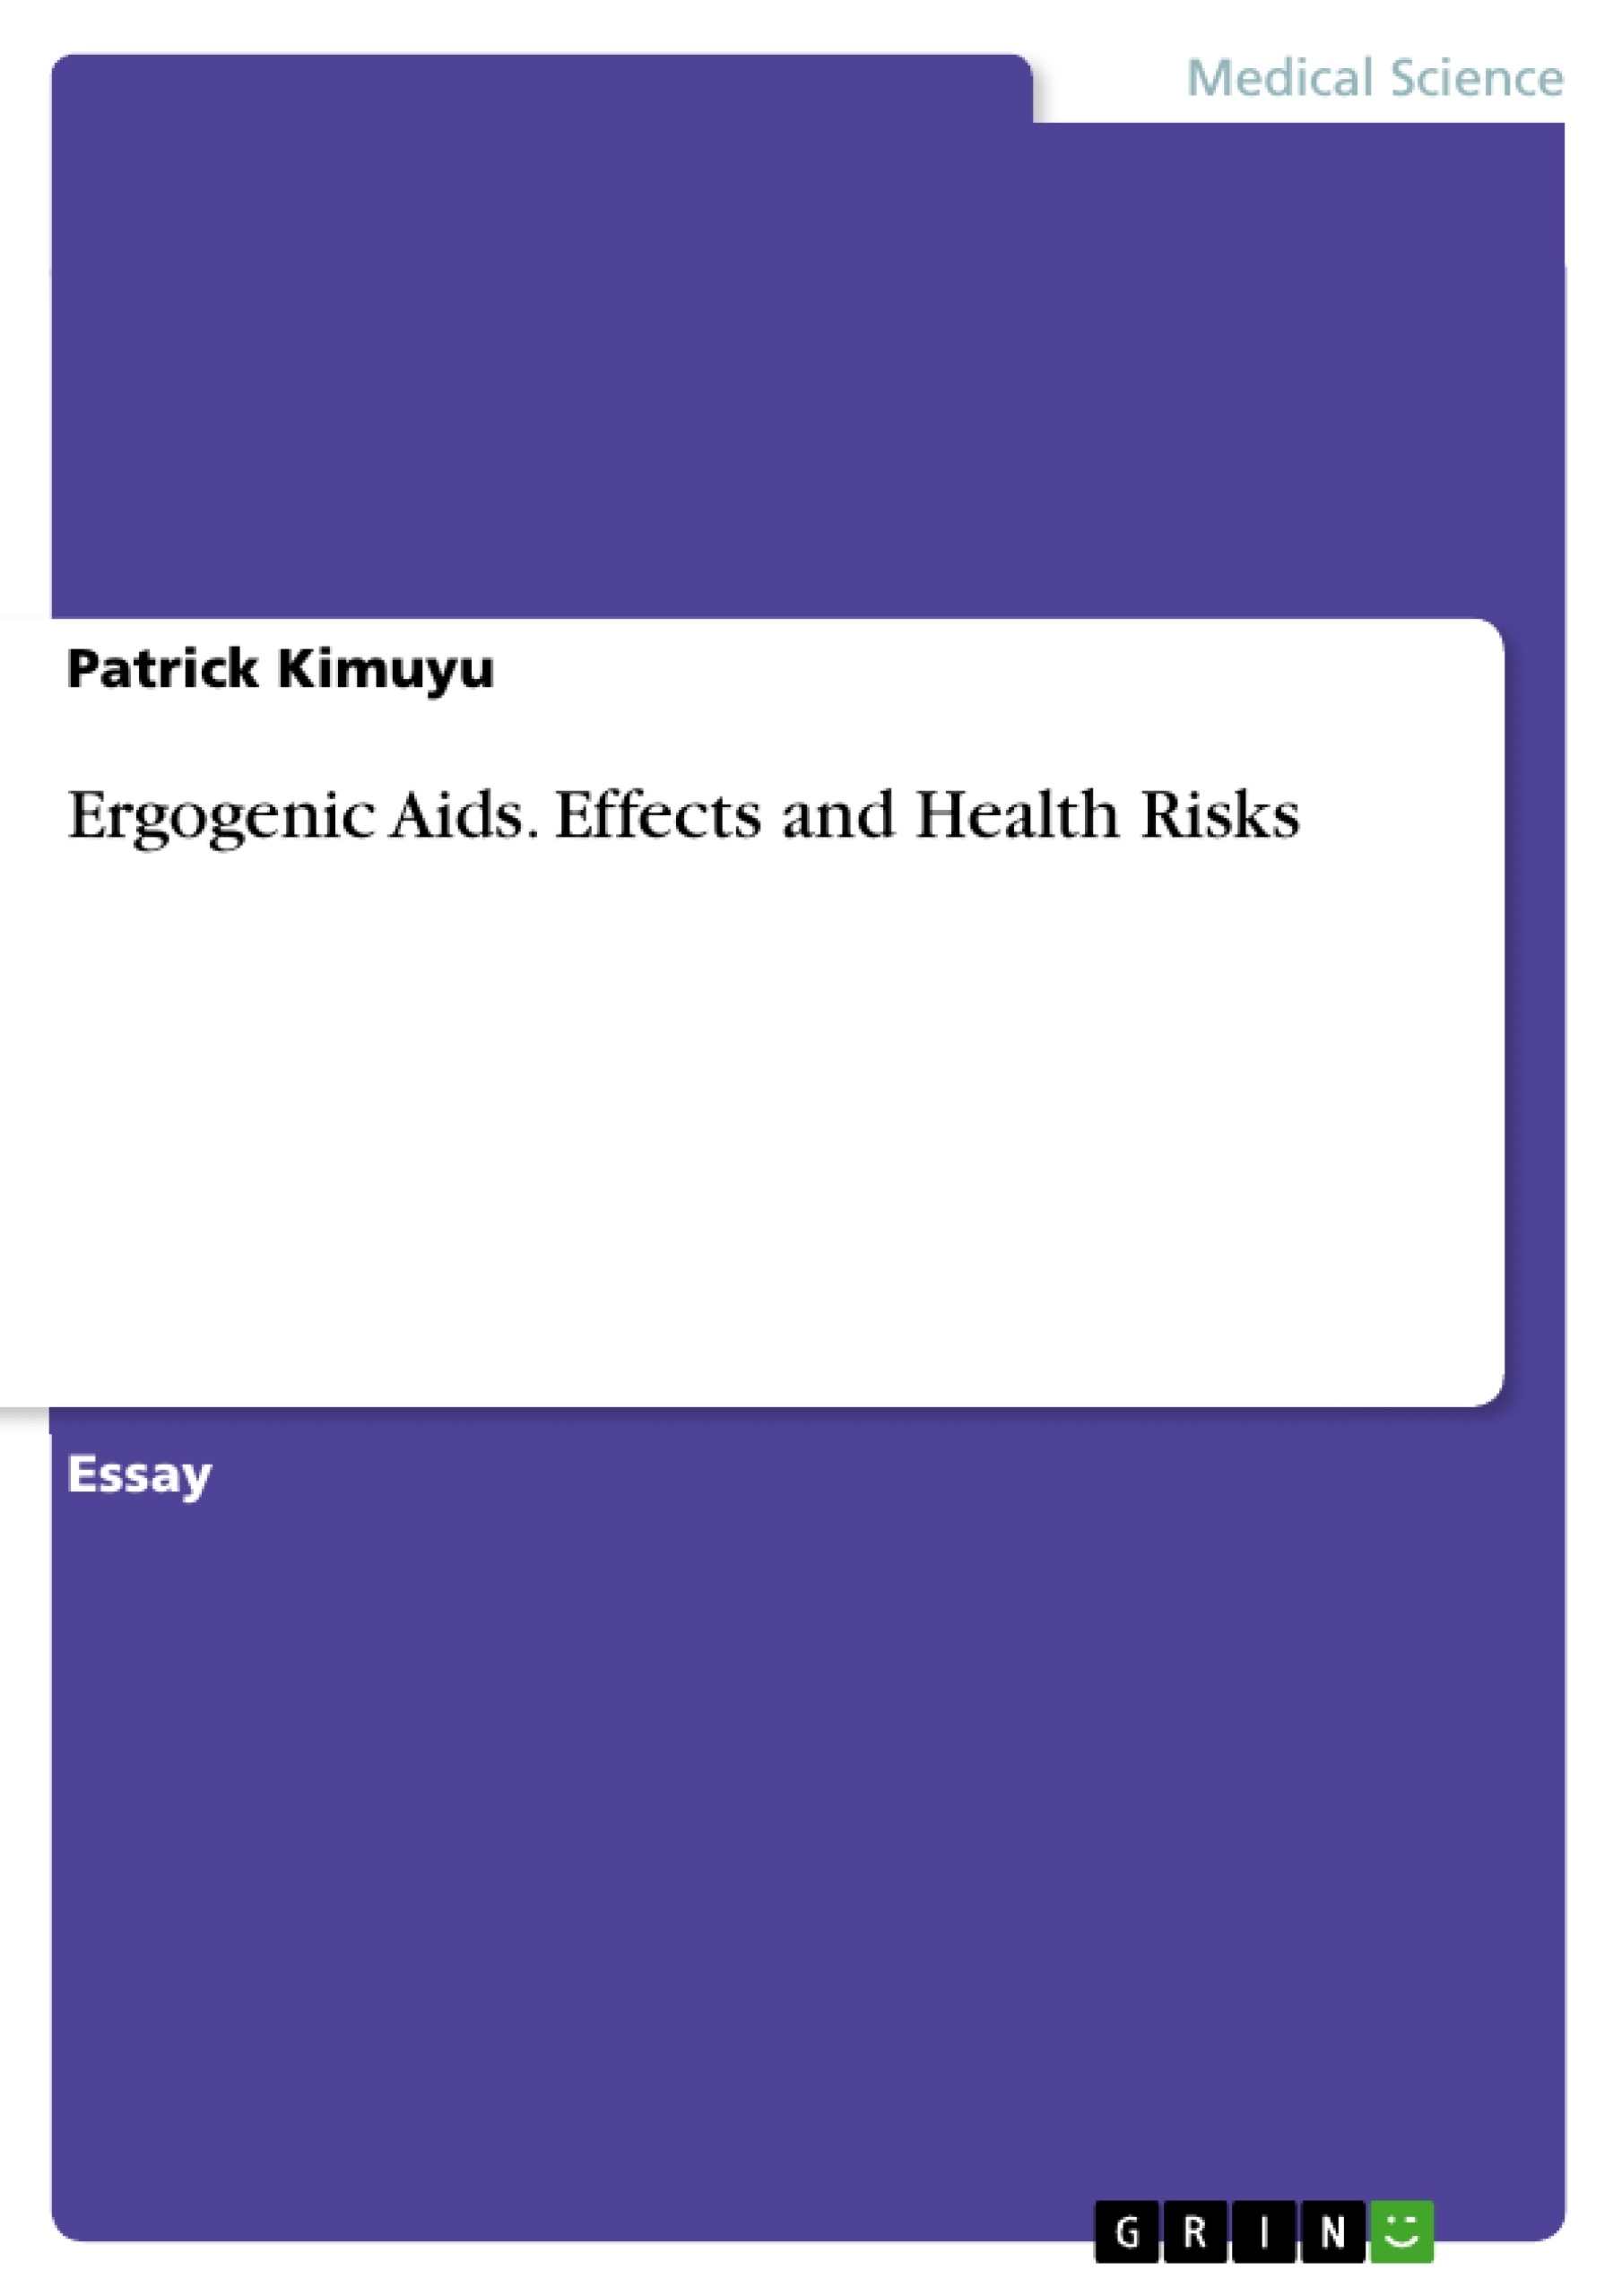 Título: Ergogenic Aids. Effects and Health Risks